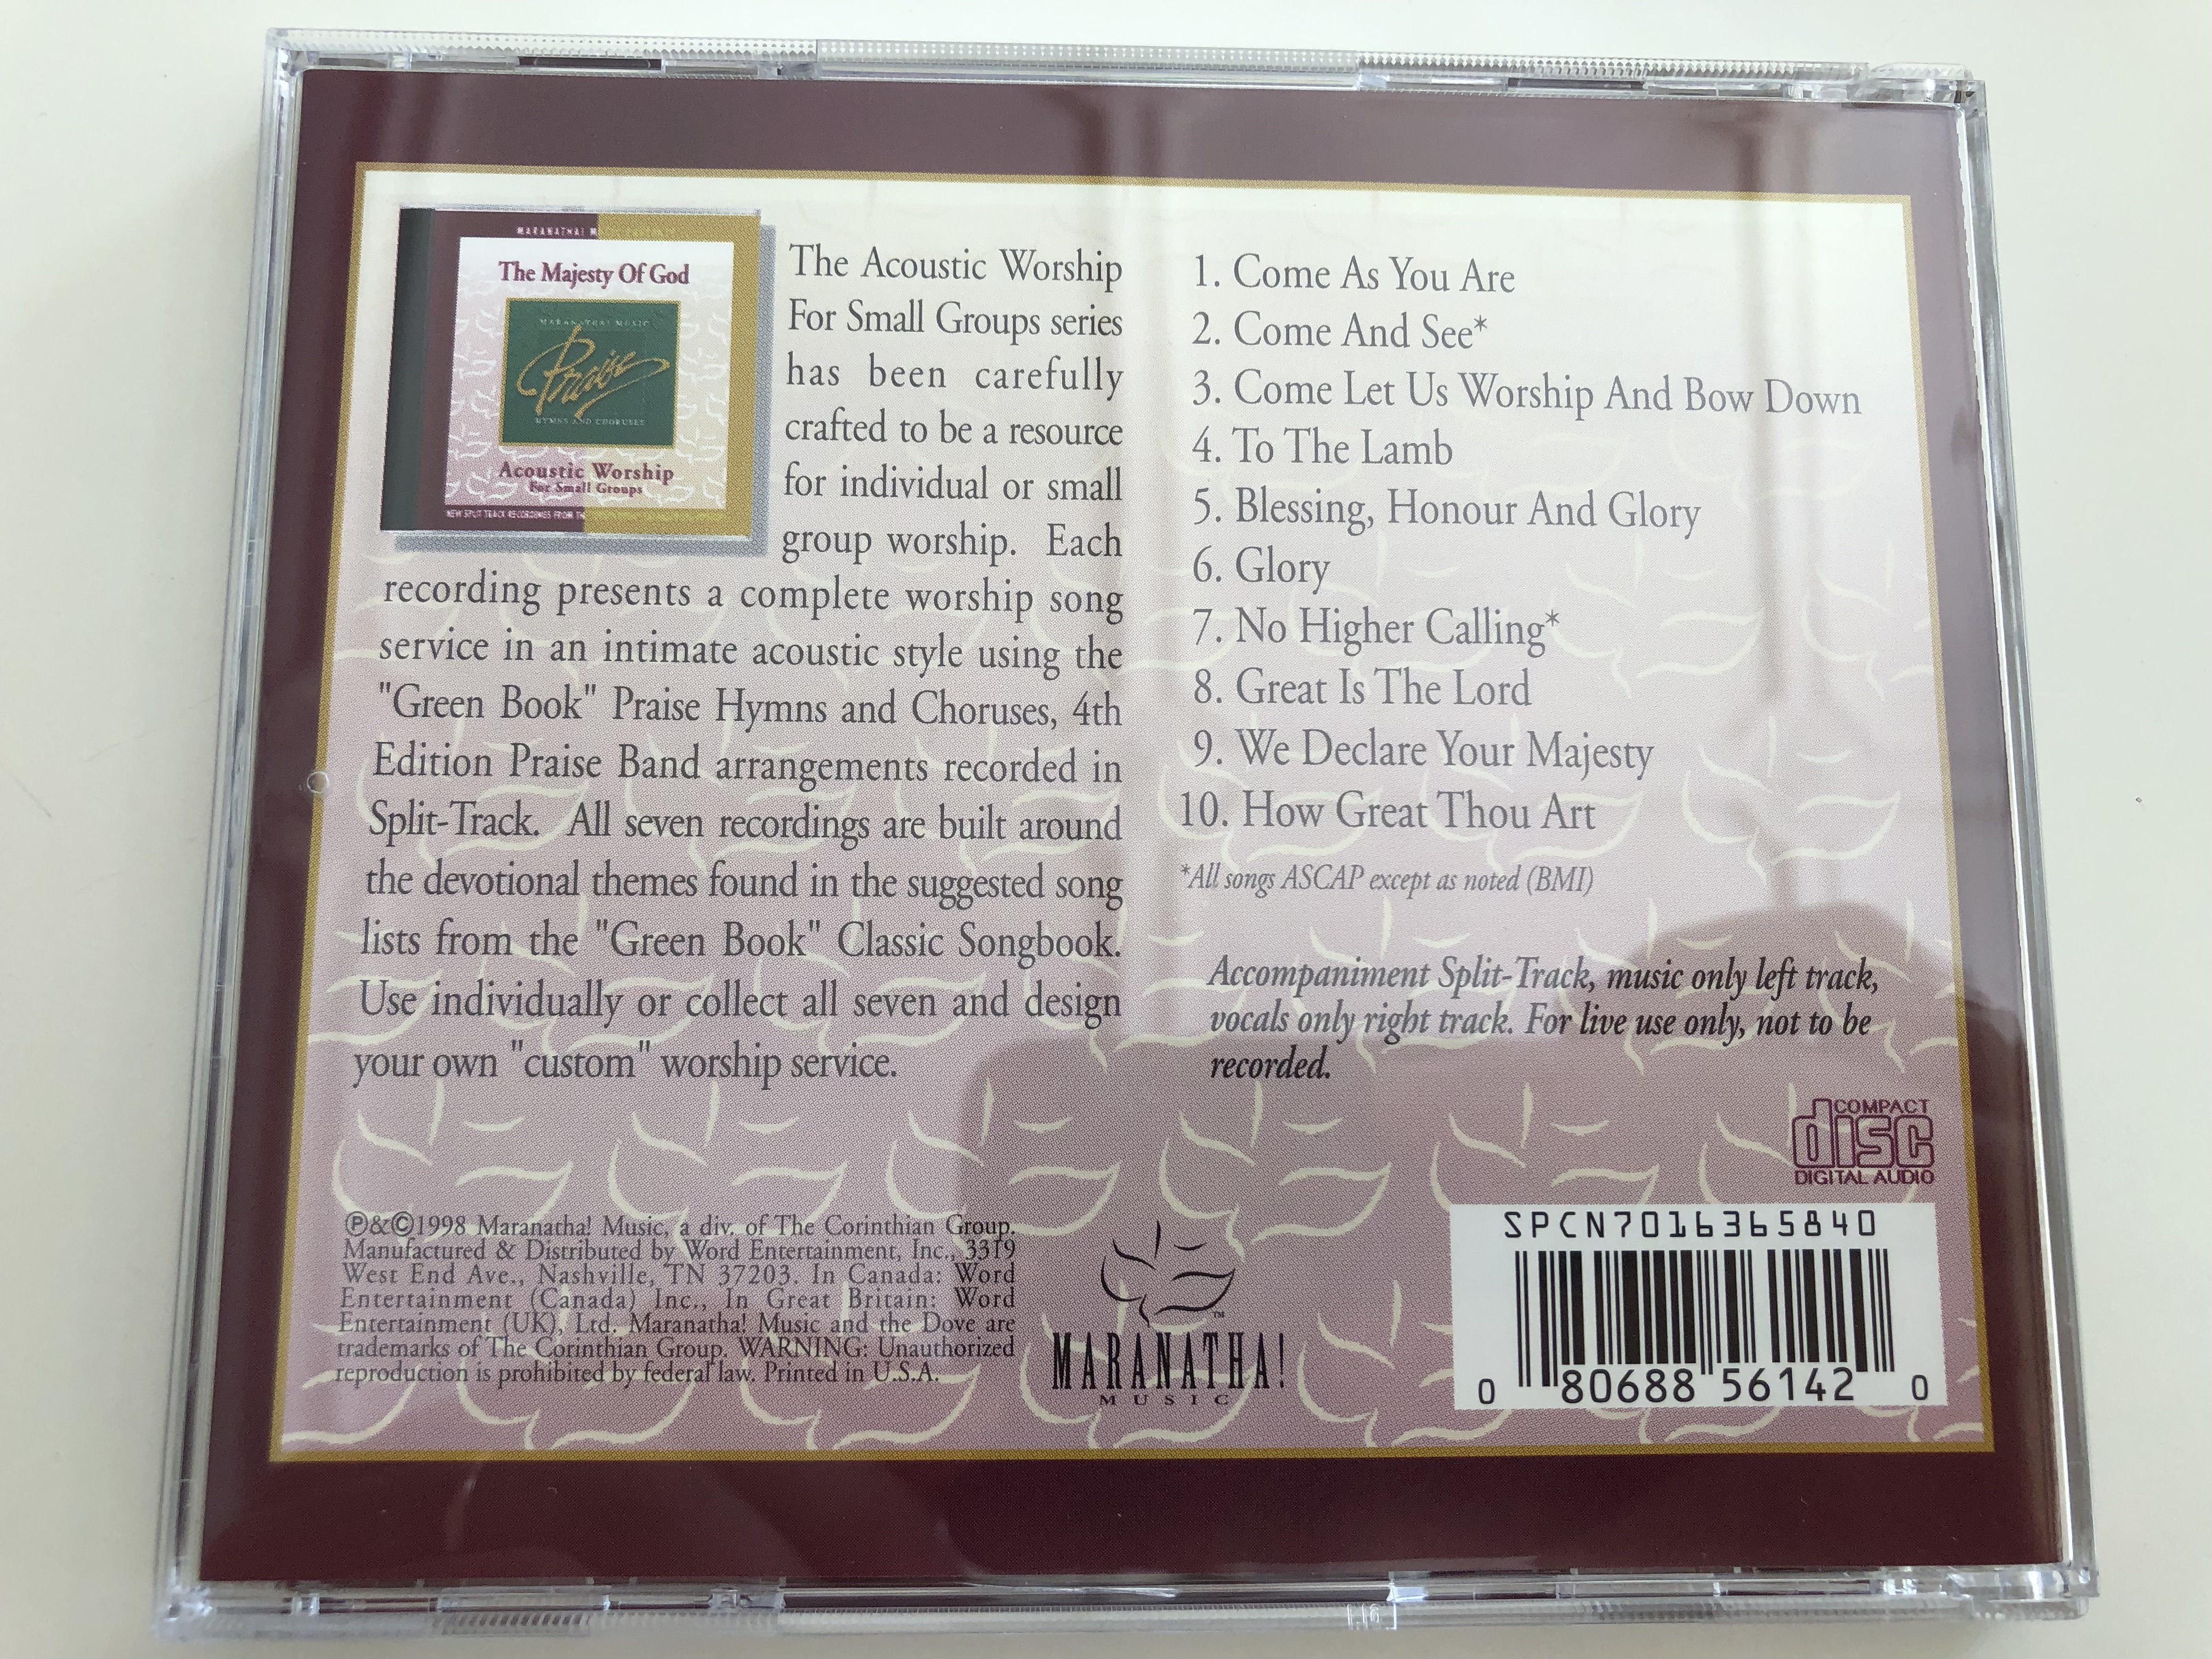 the-majesty-of-god-praise-hymns-and-choruses-acoustic-worship-for-small-groups-maranatha-music-new-split-track-recordings-from-the-green-book-expanded-4th-edition-audio-cd-1998-7-.jpg